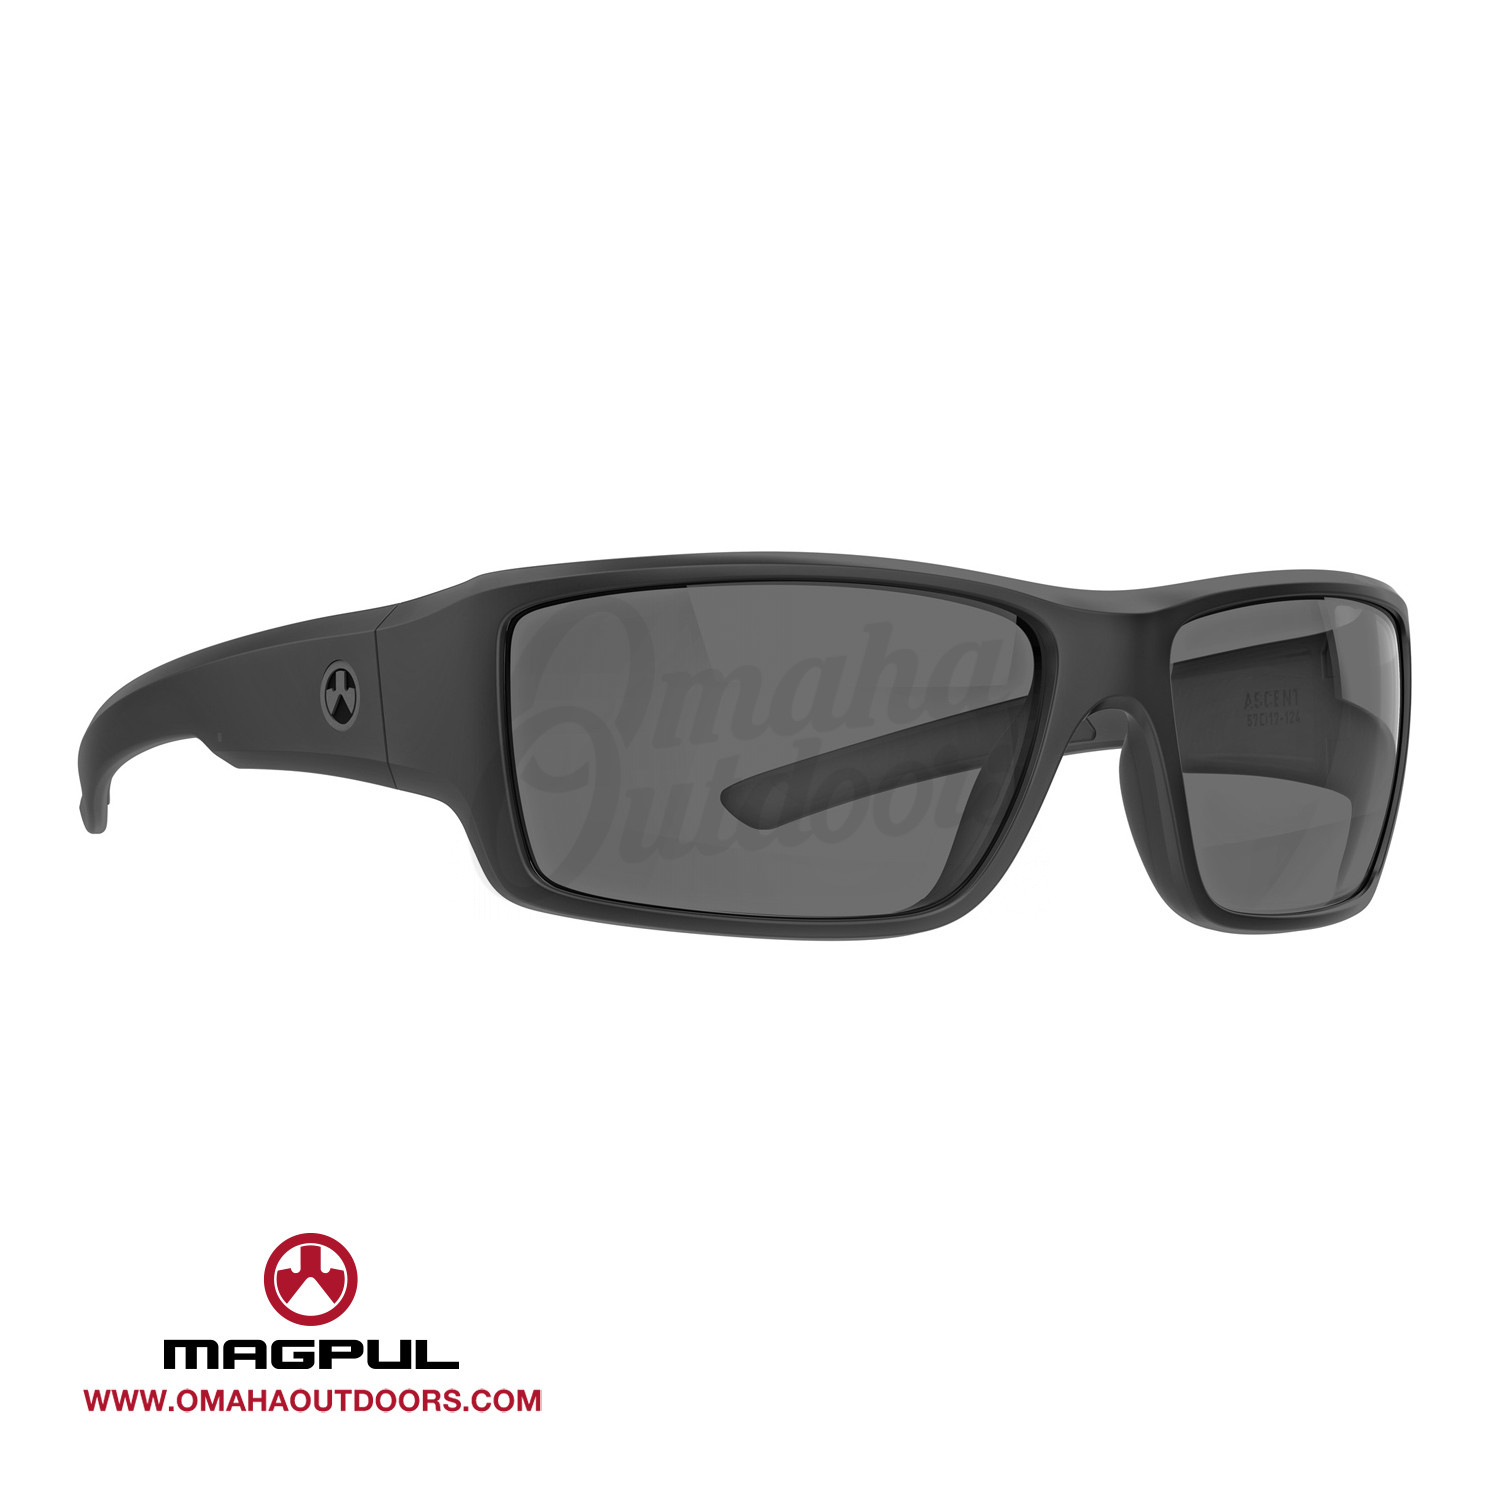 Magpul Ascent Gray Sunglasses In Green - Stock Lens